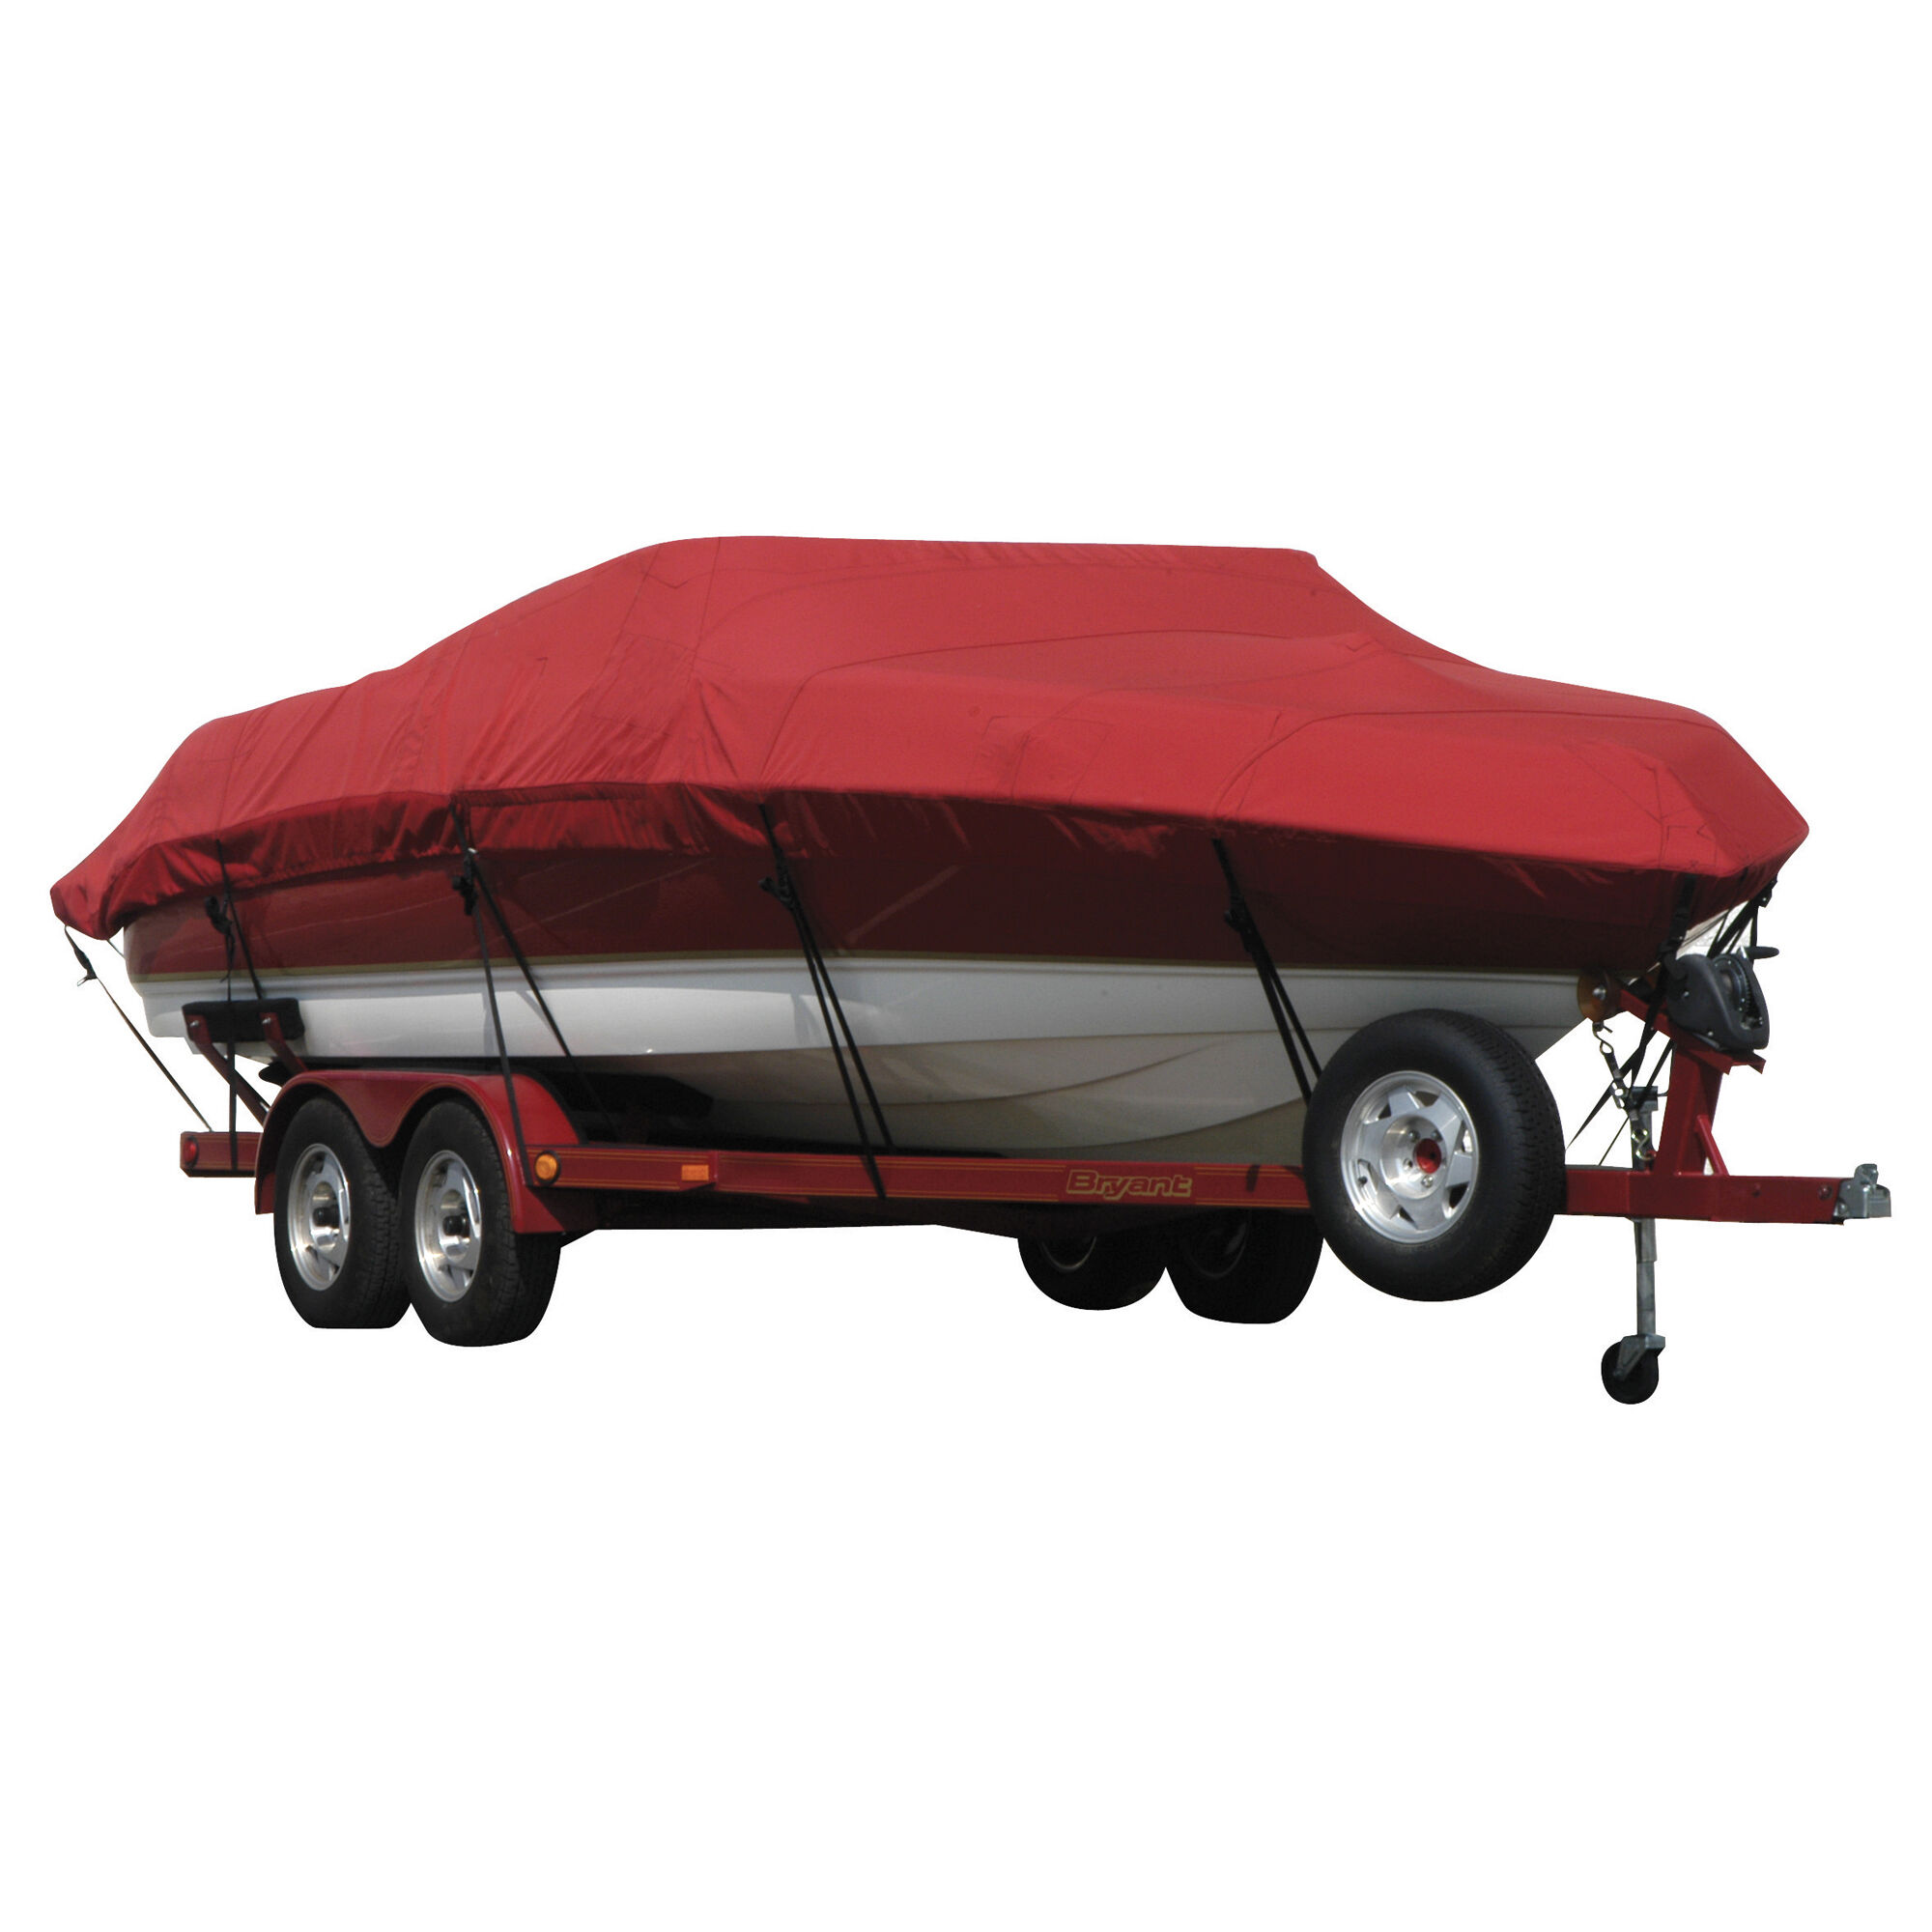 Covermate Exact Fit Sunbrella Boat Cover for Supreme 19 Cs 19 Cs Does Not Cover PLATFORMm. Red